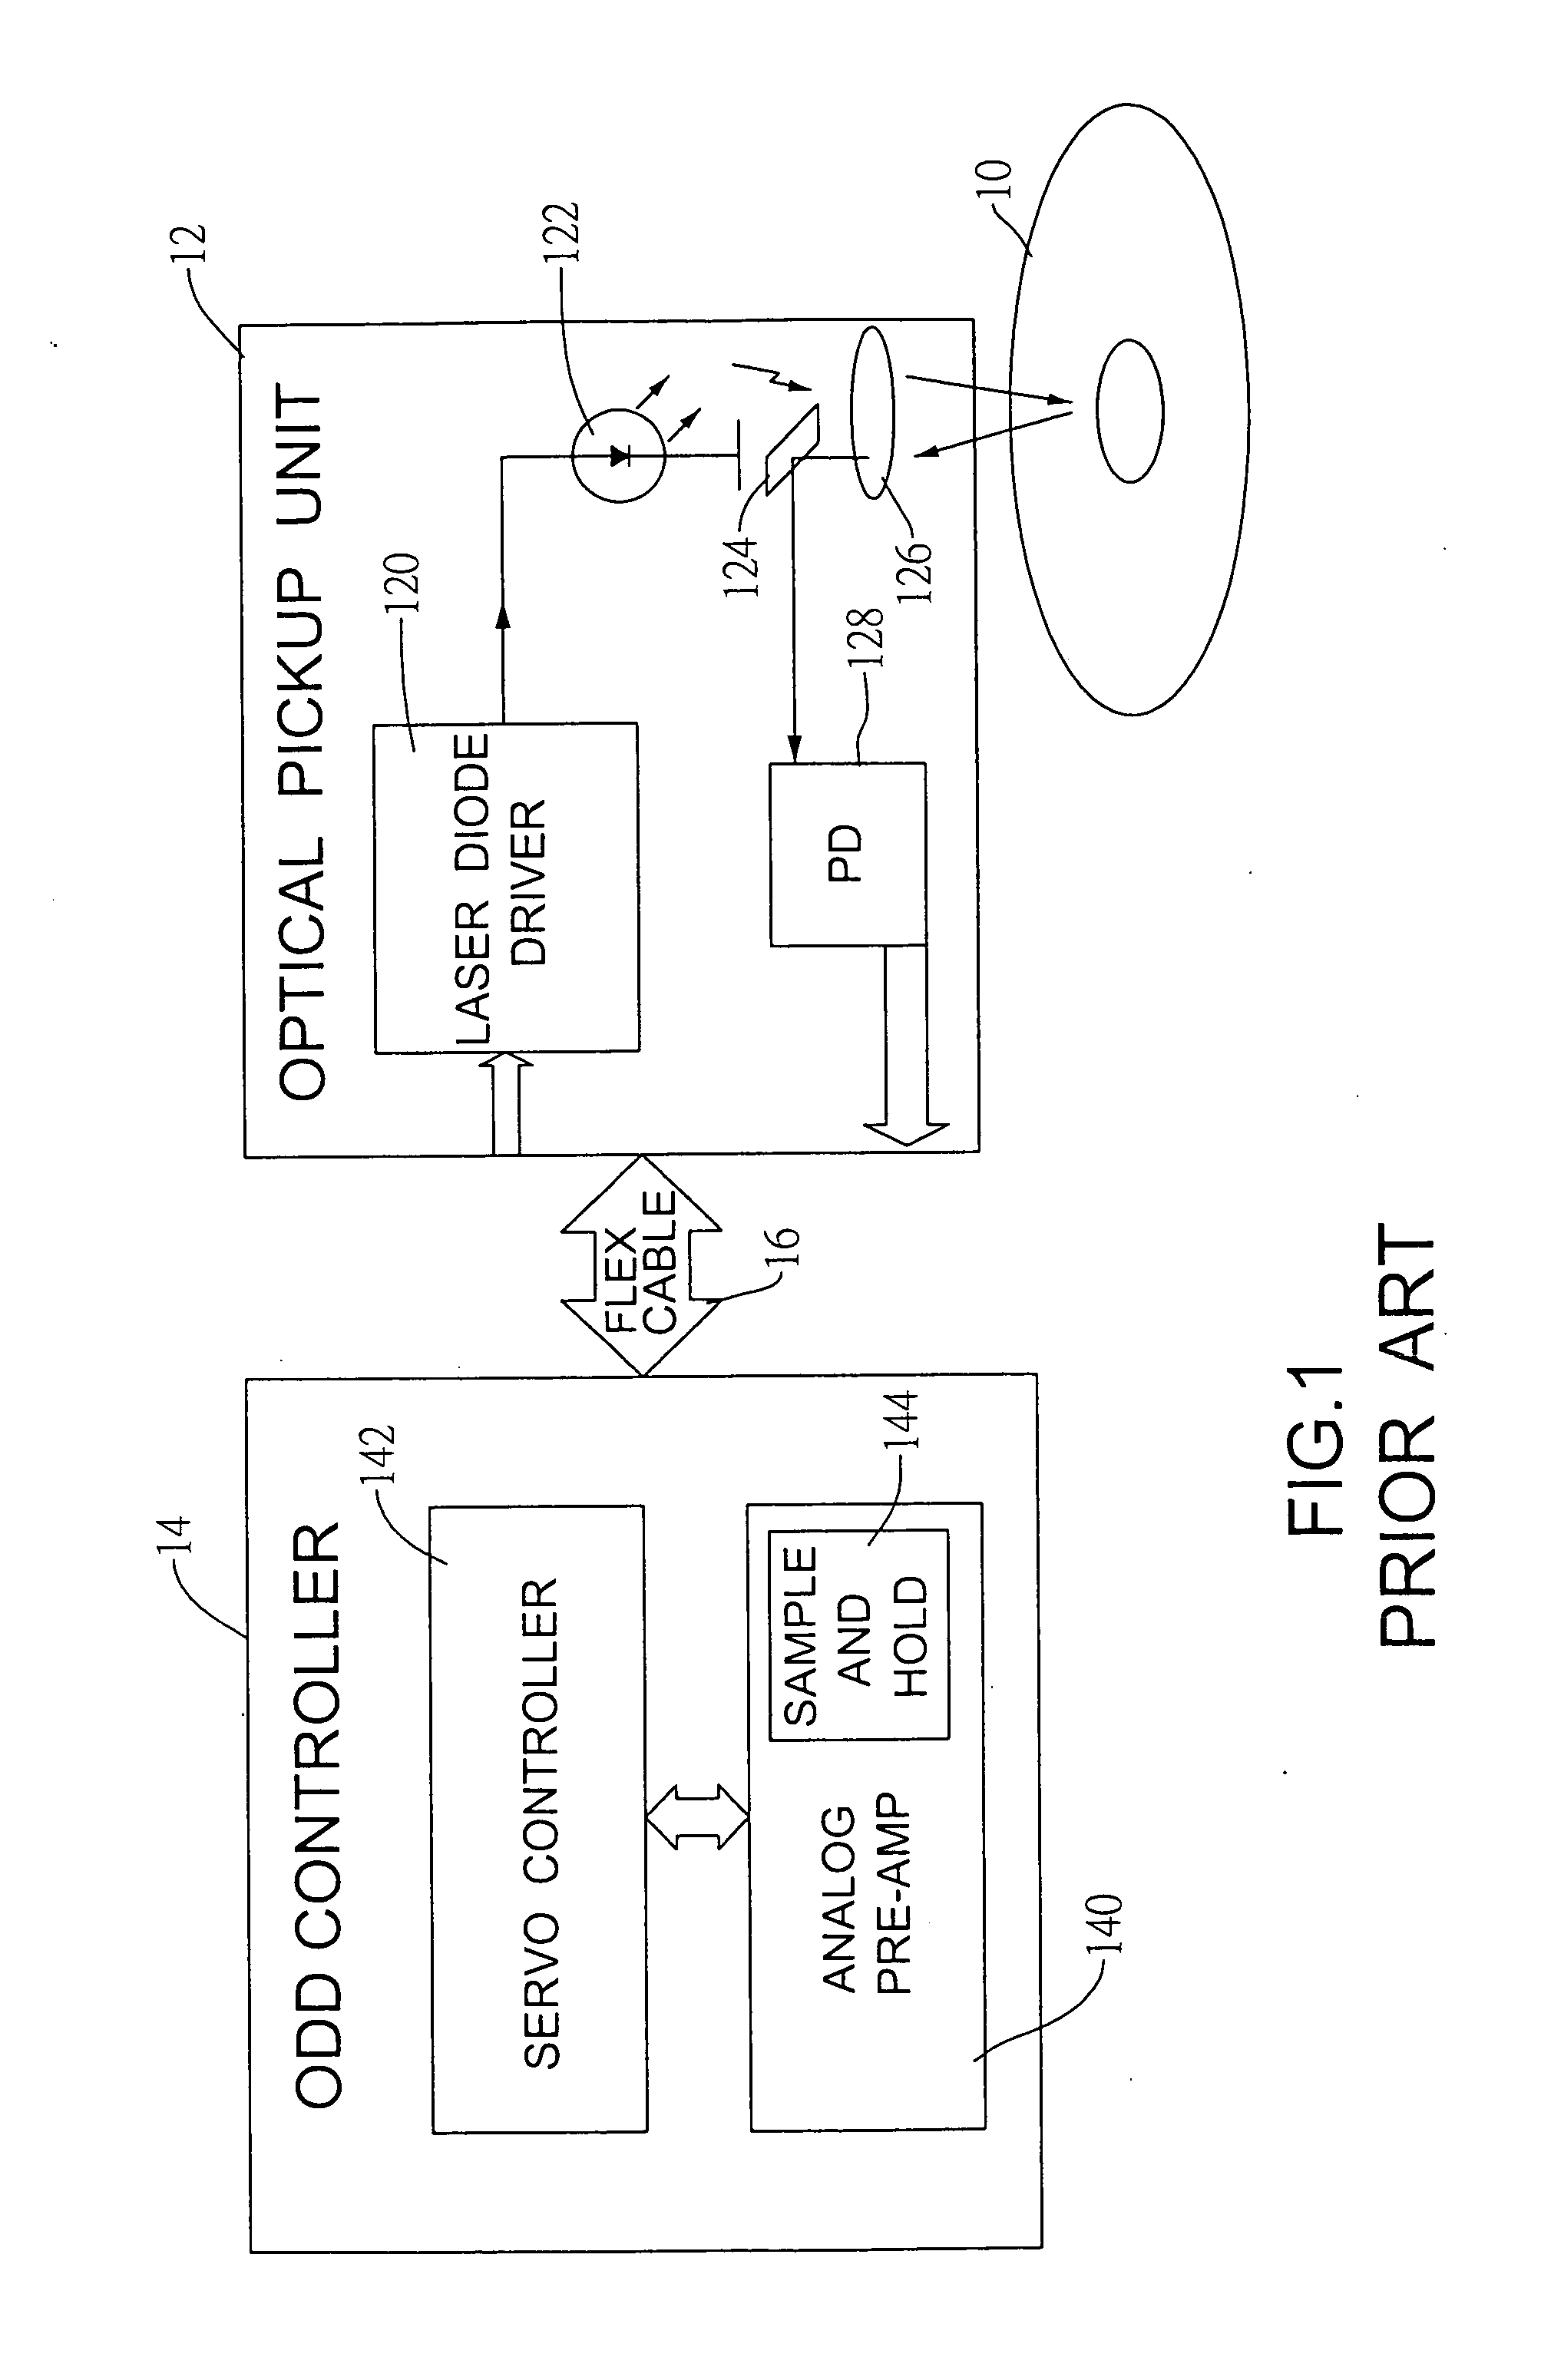 Signal processing method and optical pickup for keeping available information during high speed optical recording